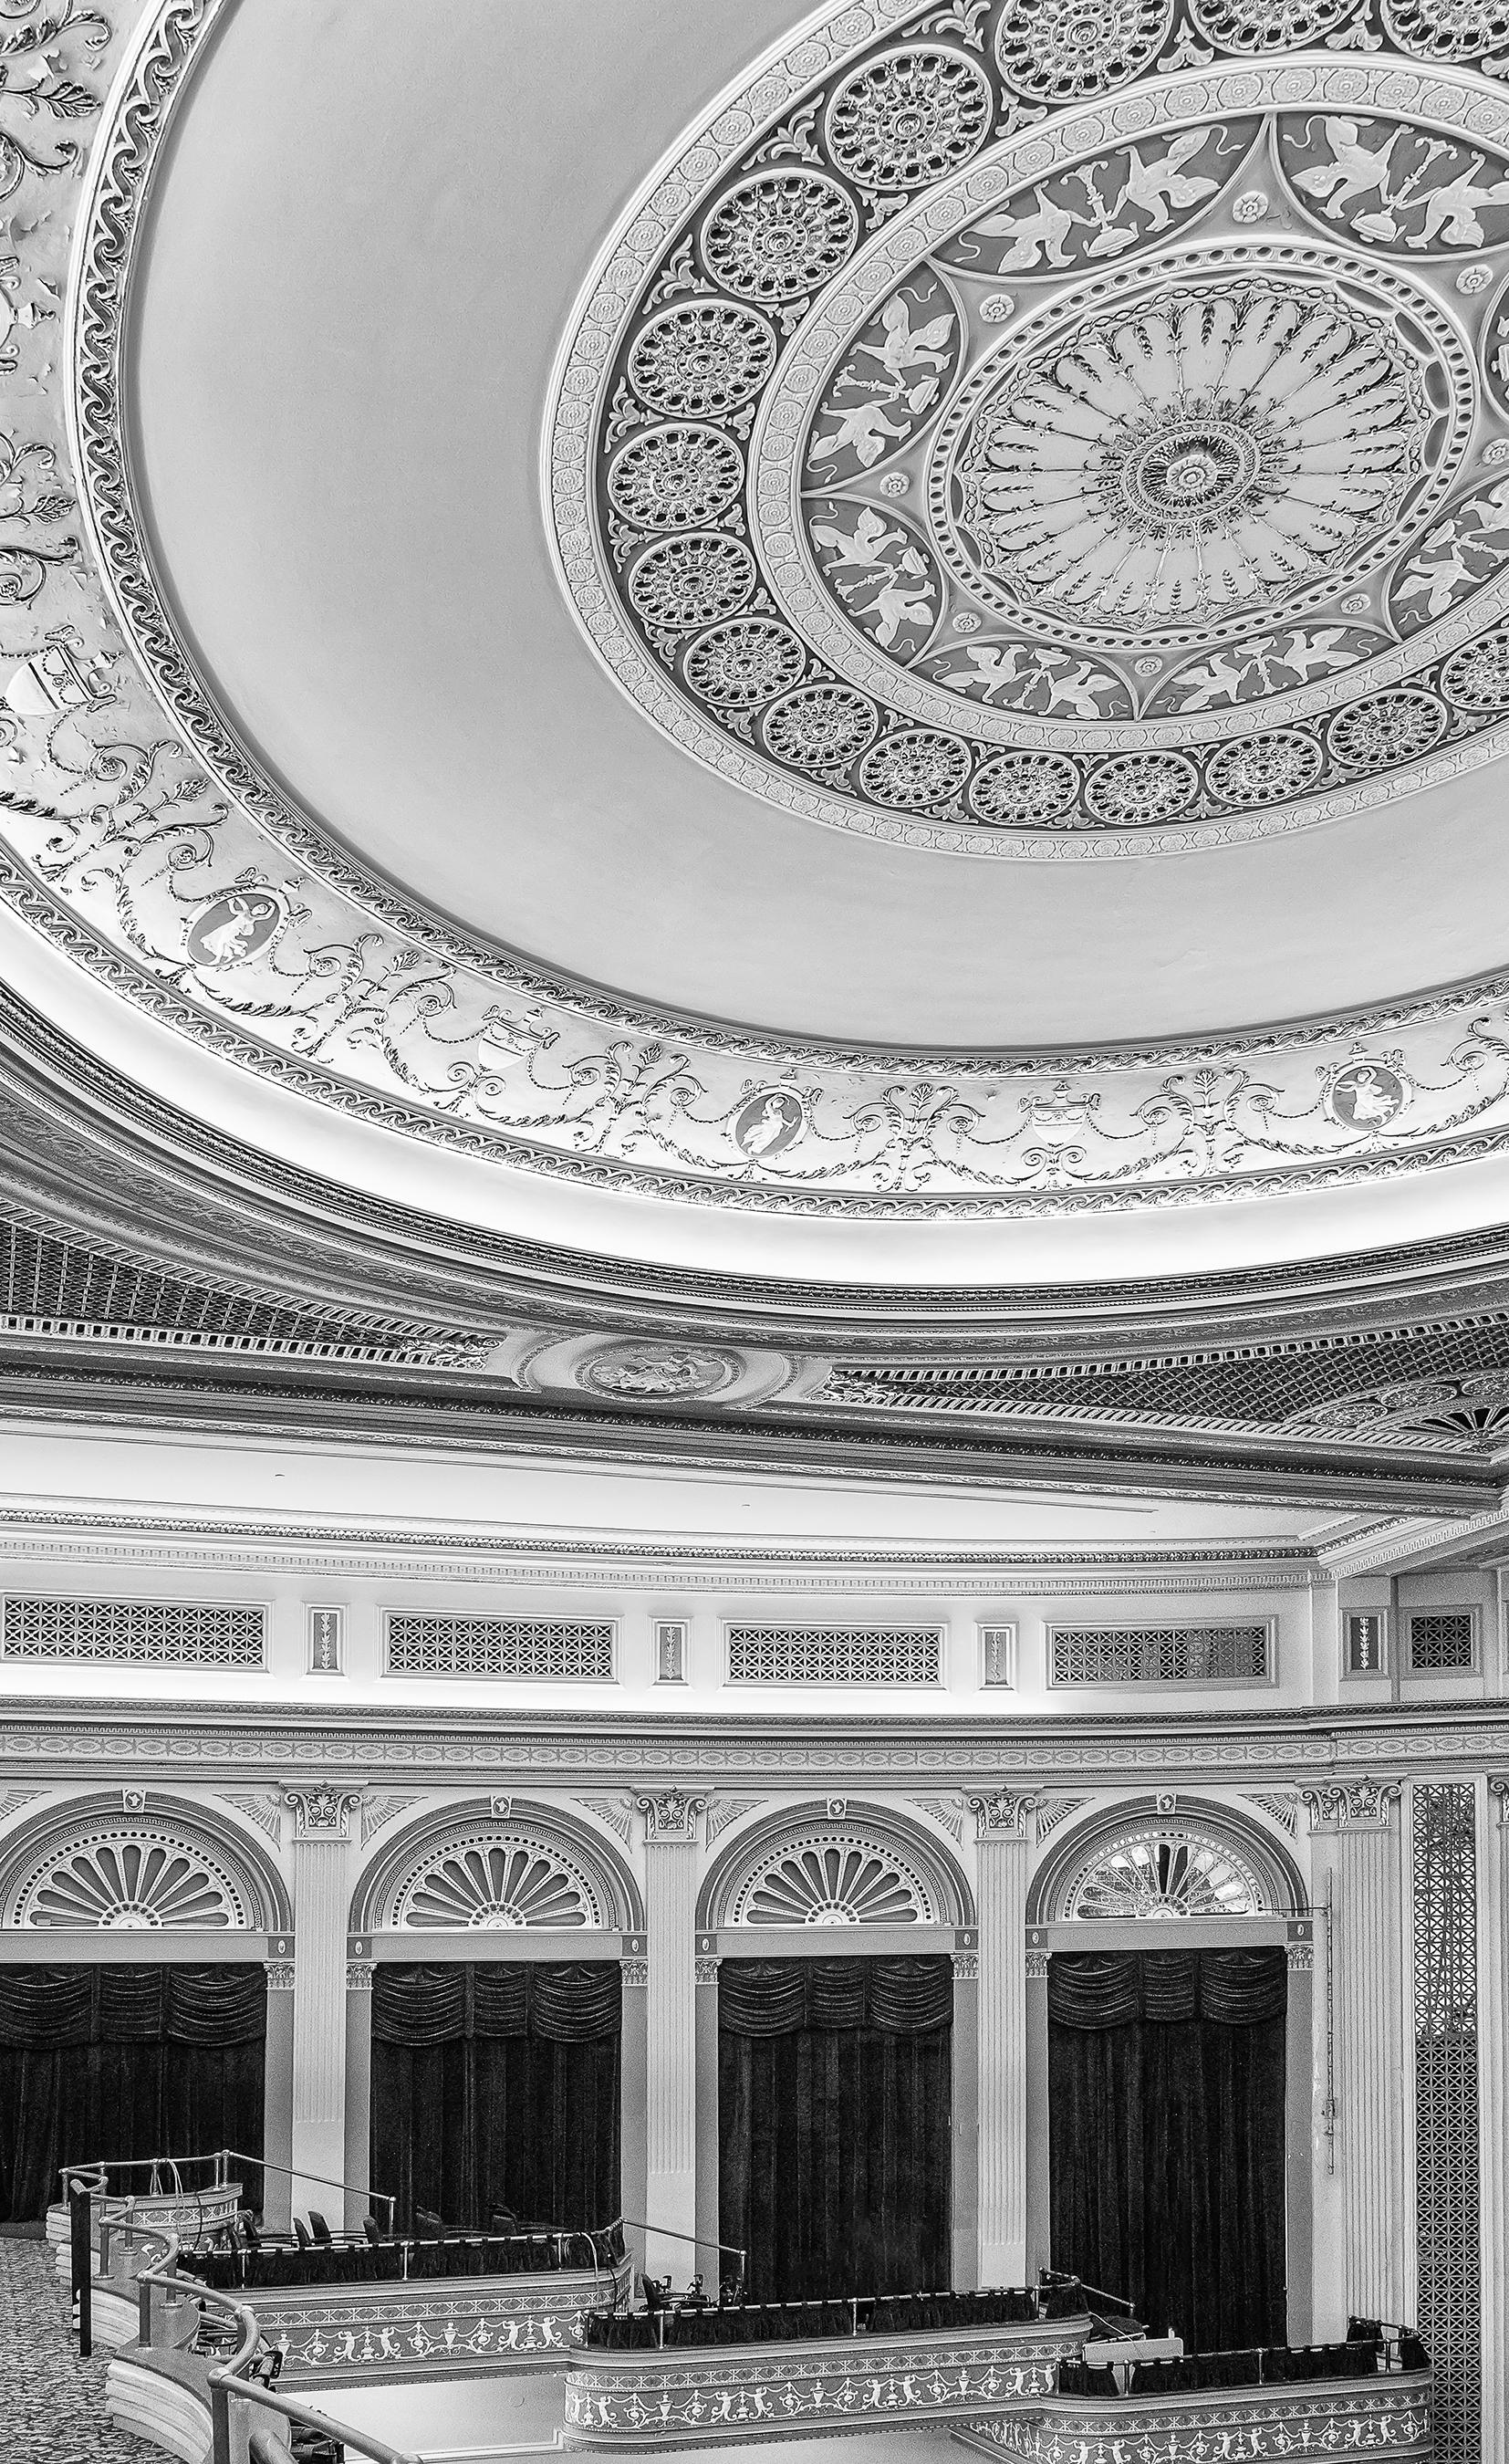 Myrtie Cope Black and White Photograph - "Box Seats with Ceiling Detail - Lucas Theatre" - Ezra Stoller